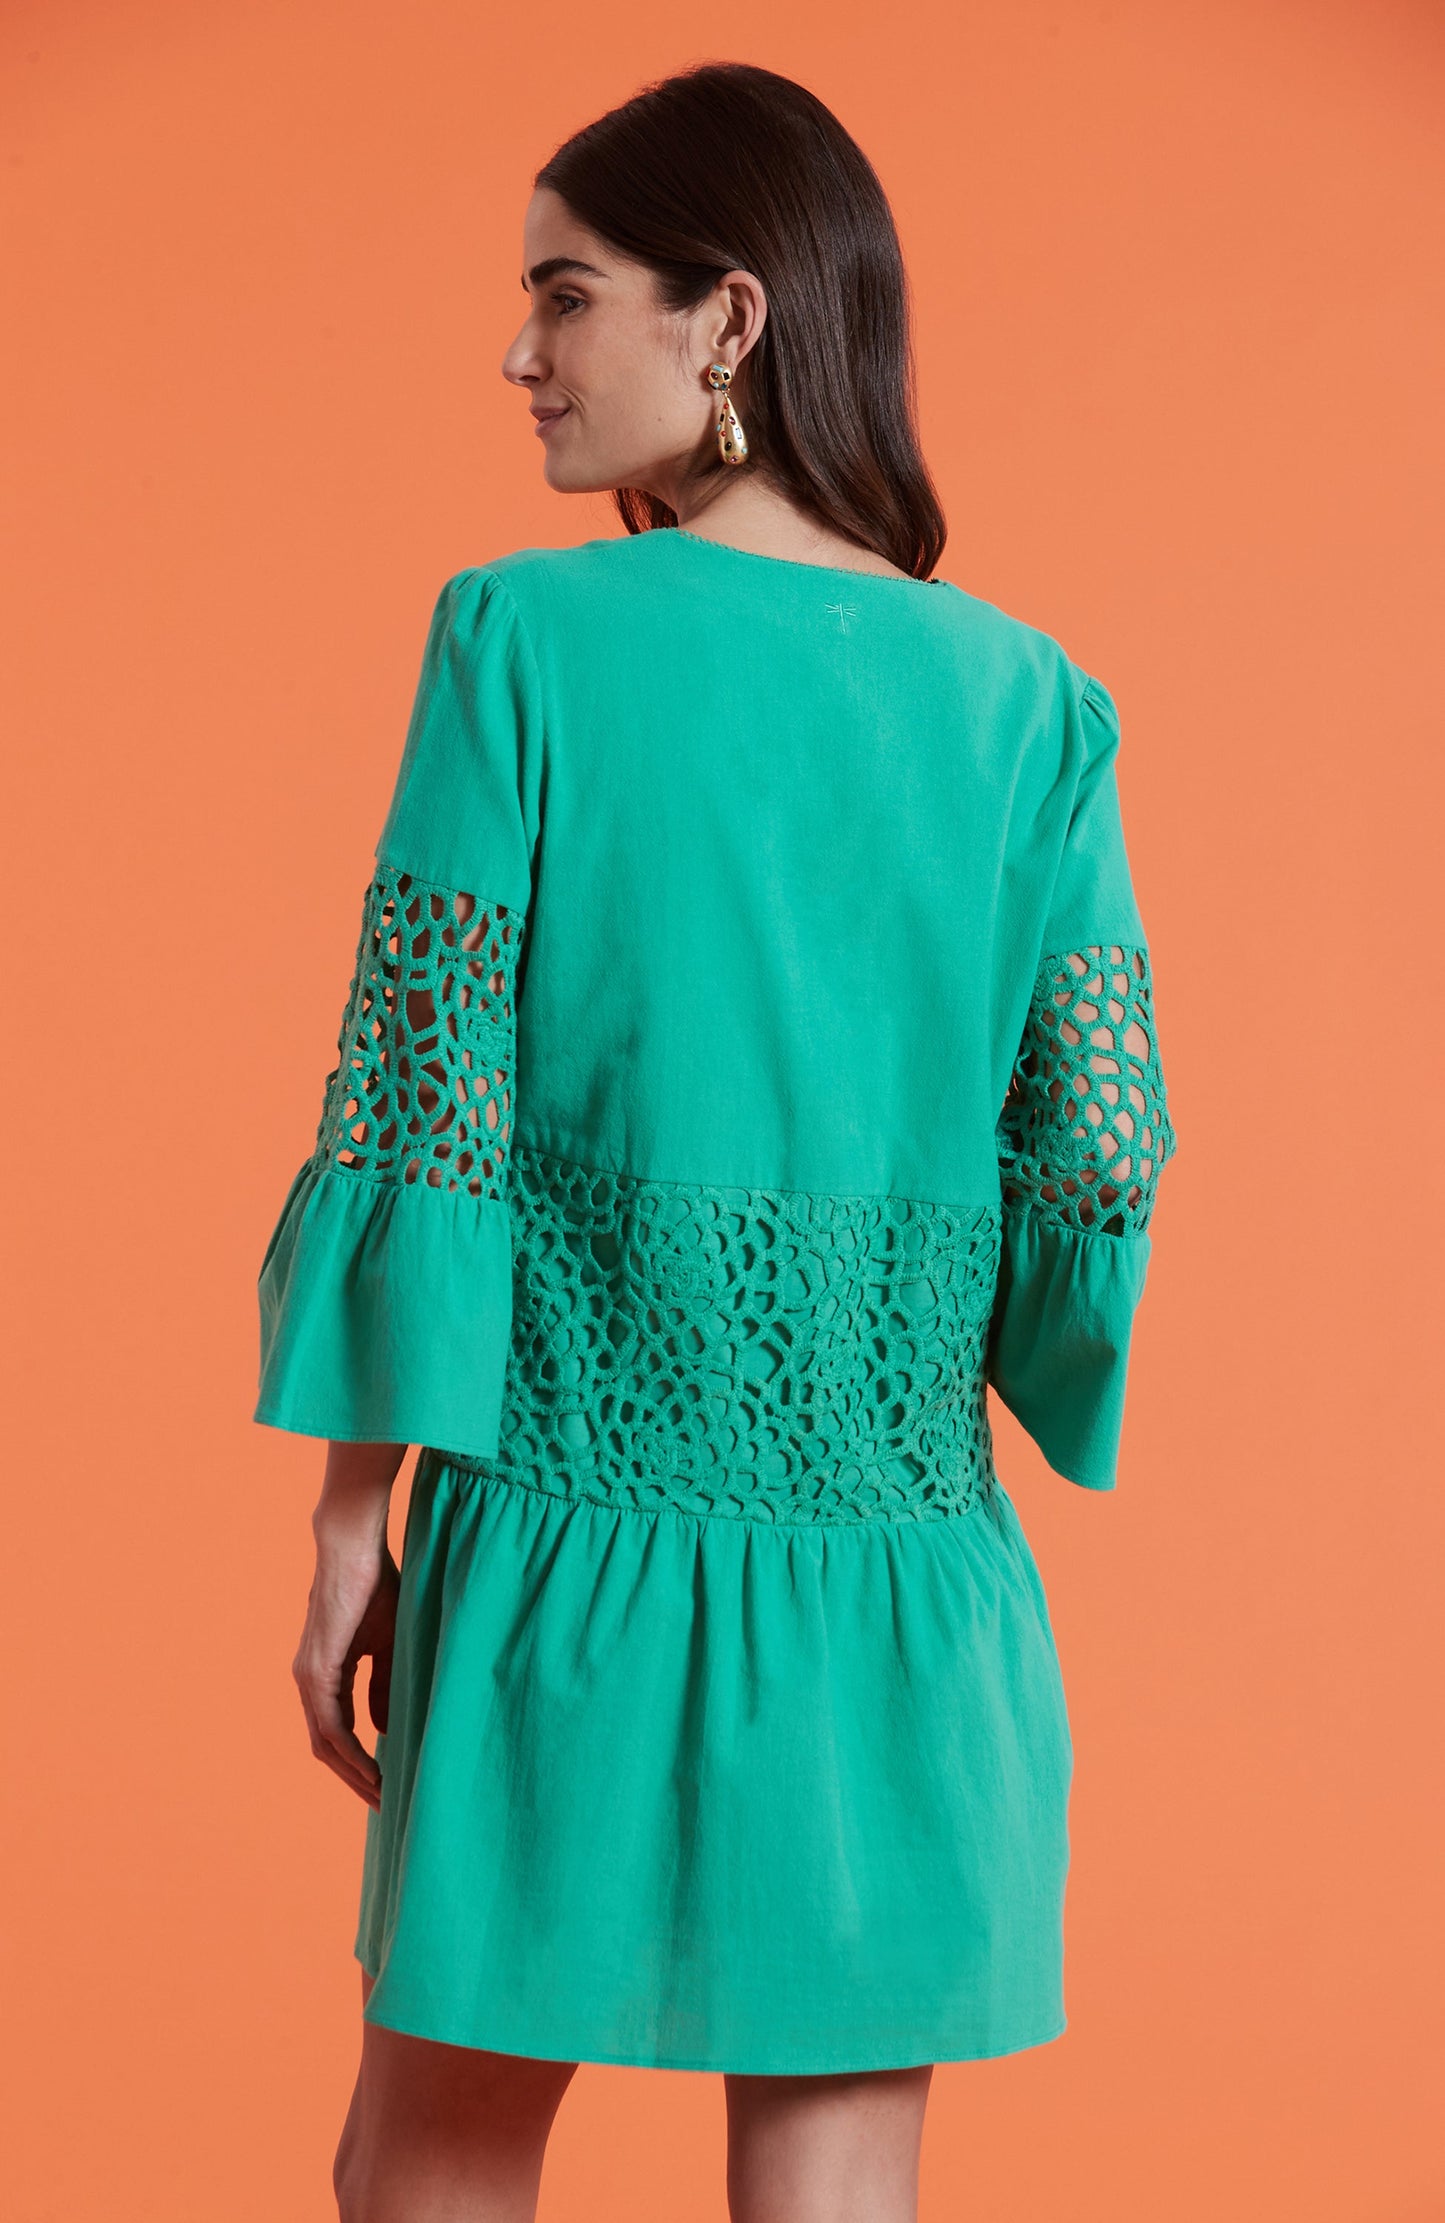 IZZY EYELET DRESS WITH EMBROIDERY